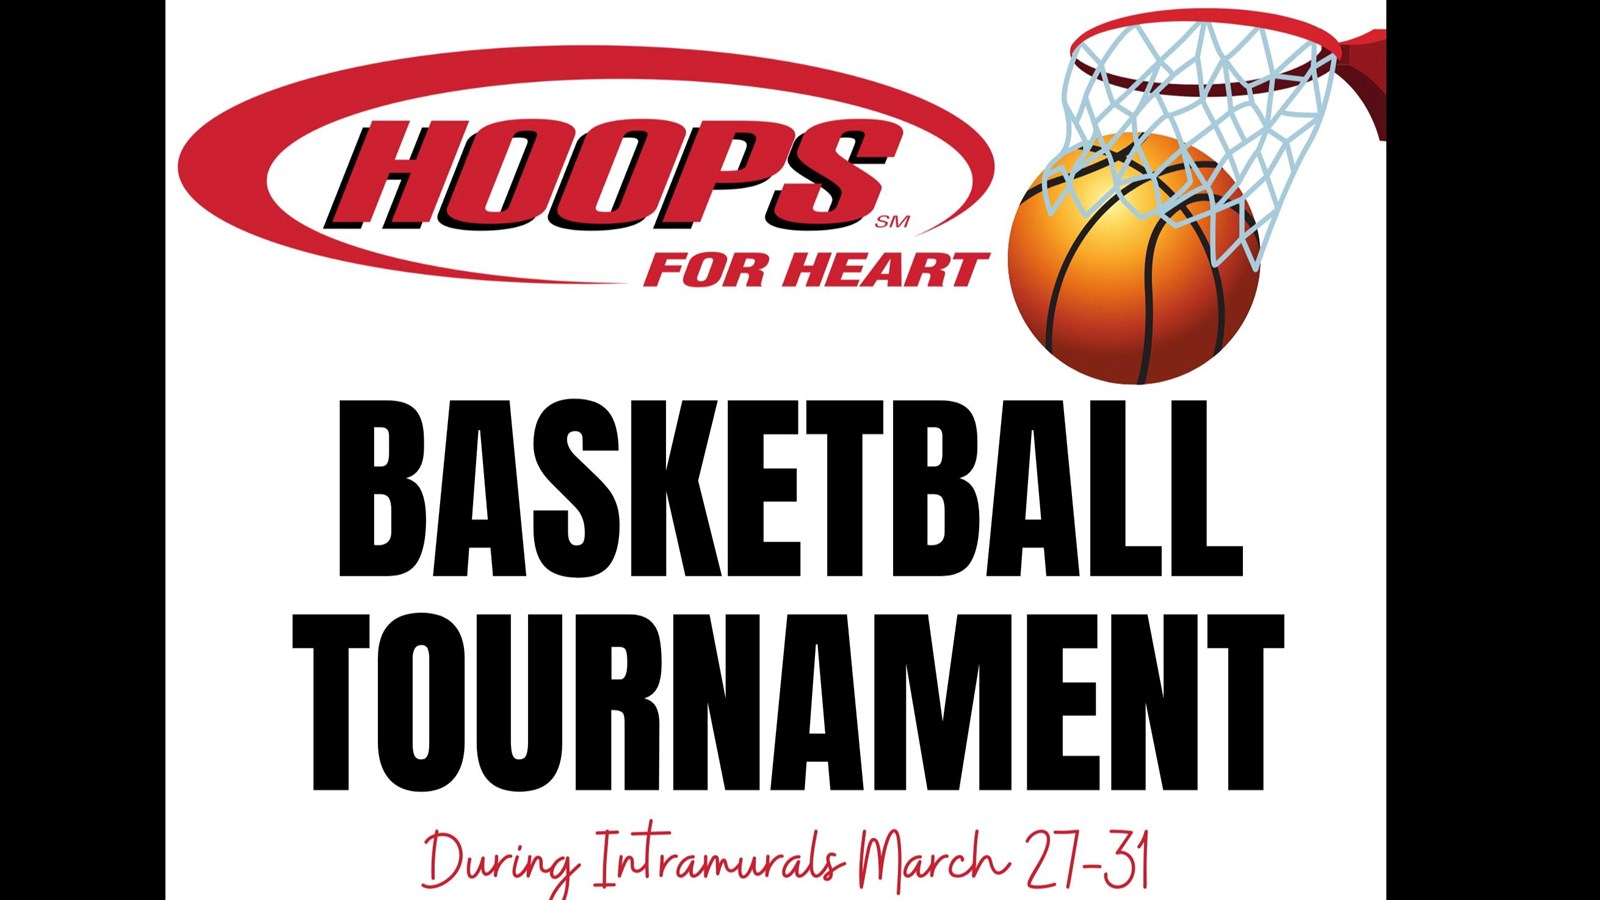 Hoops for Heart basketball tournament-March 27-31